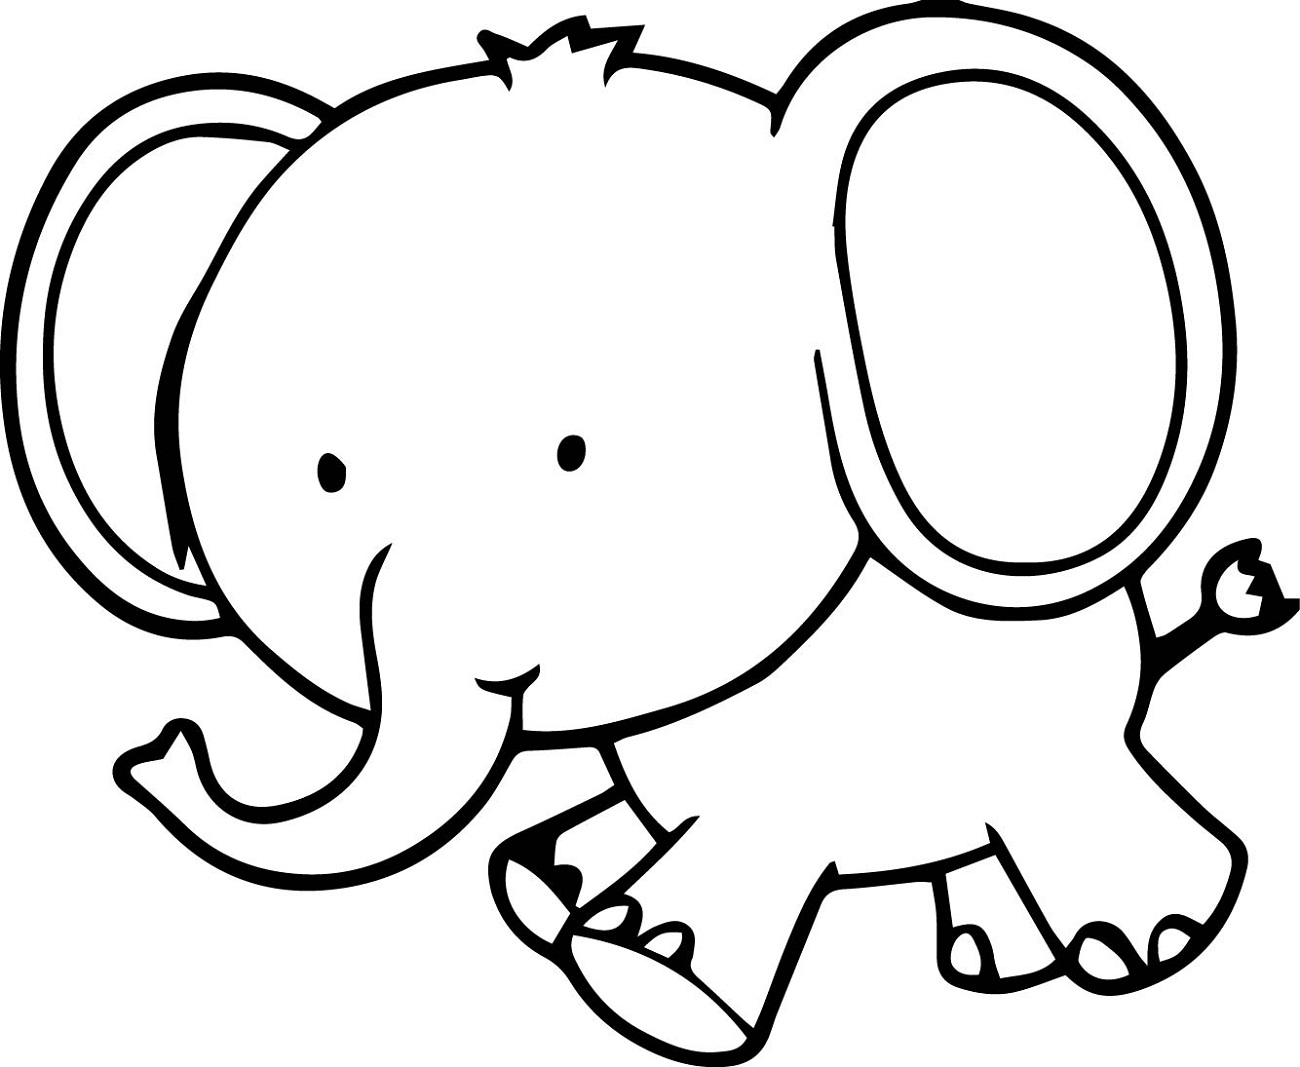 Baby Elephant Coloring Pages for Kindergarten | Activity Shelter